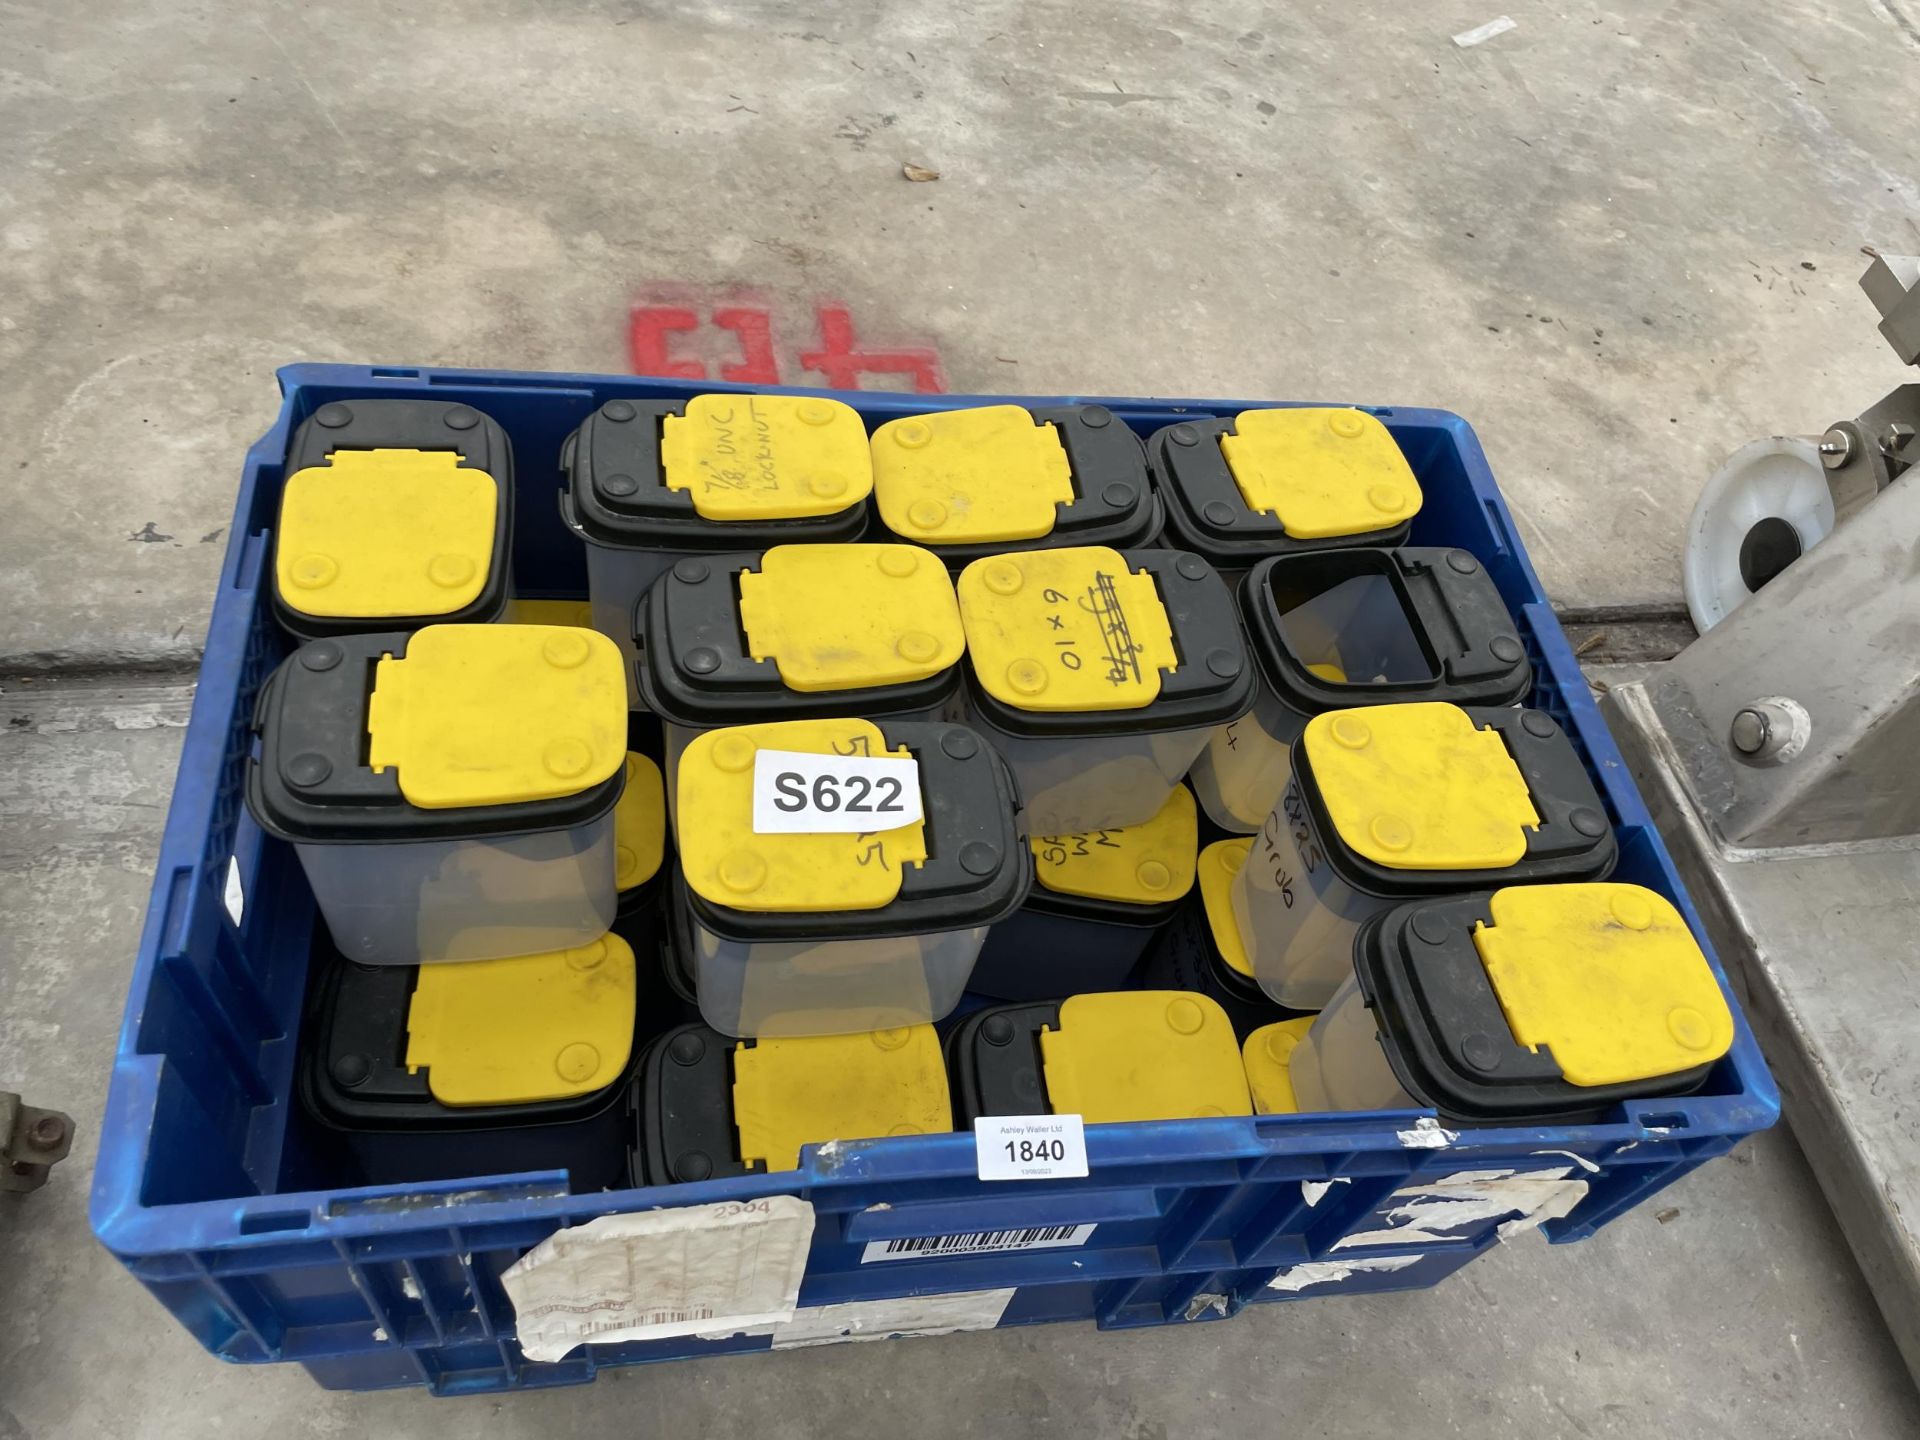 A LARGE QUANTITY OF PLASTIC HARDWARE STORAGE BOXES - Image 2 of 3